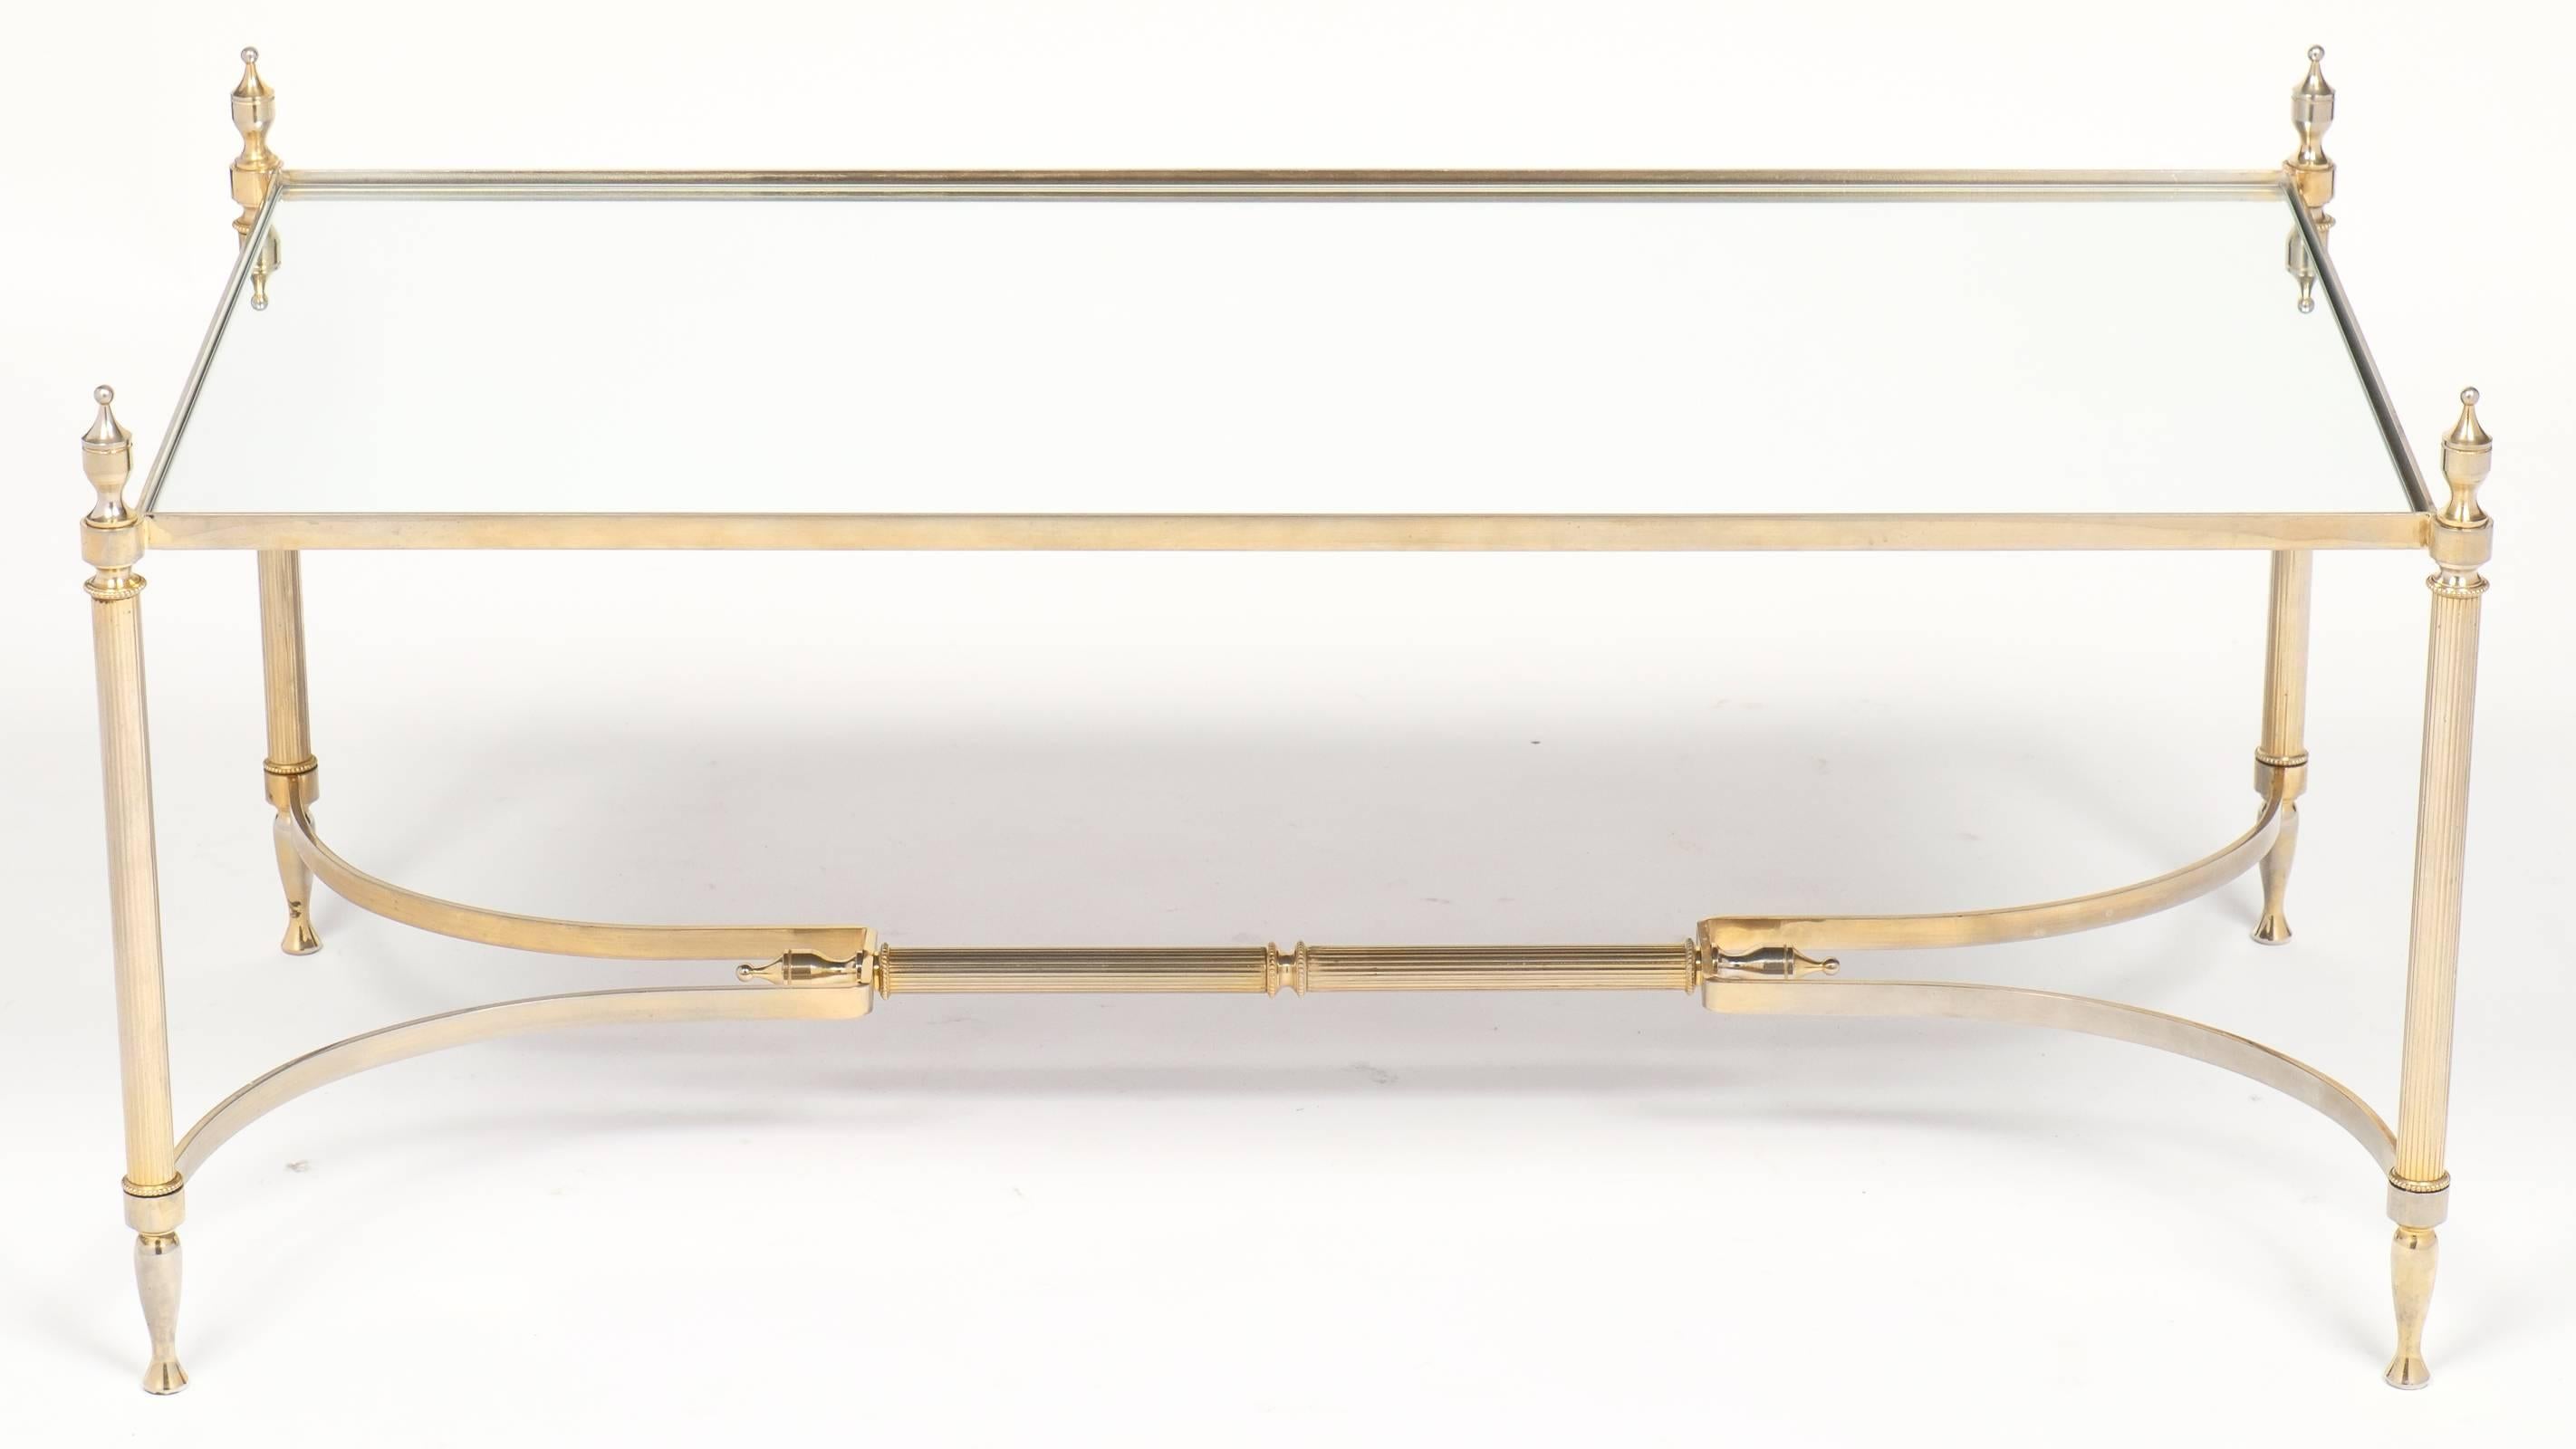 Neoclassical French Neoclassic Mirror Top Brass Cocktail Table